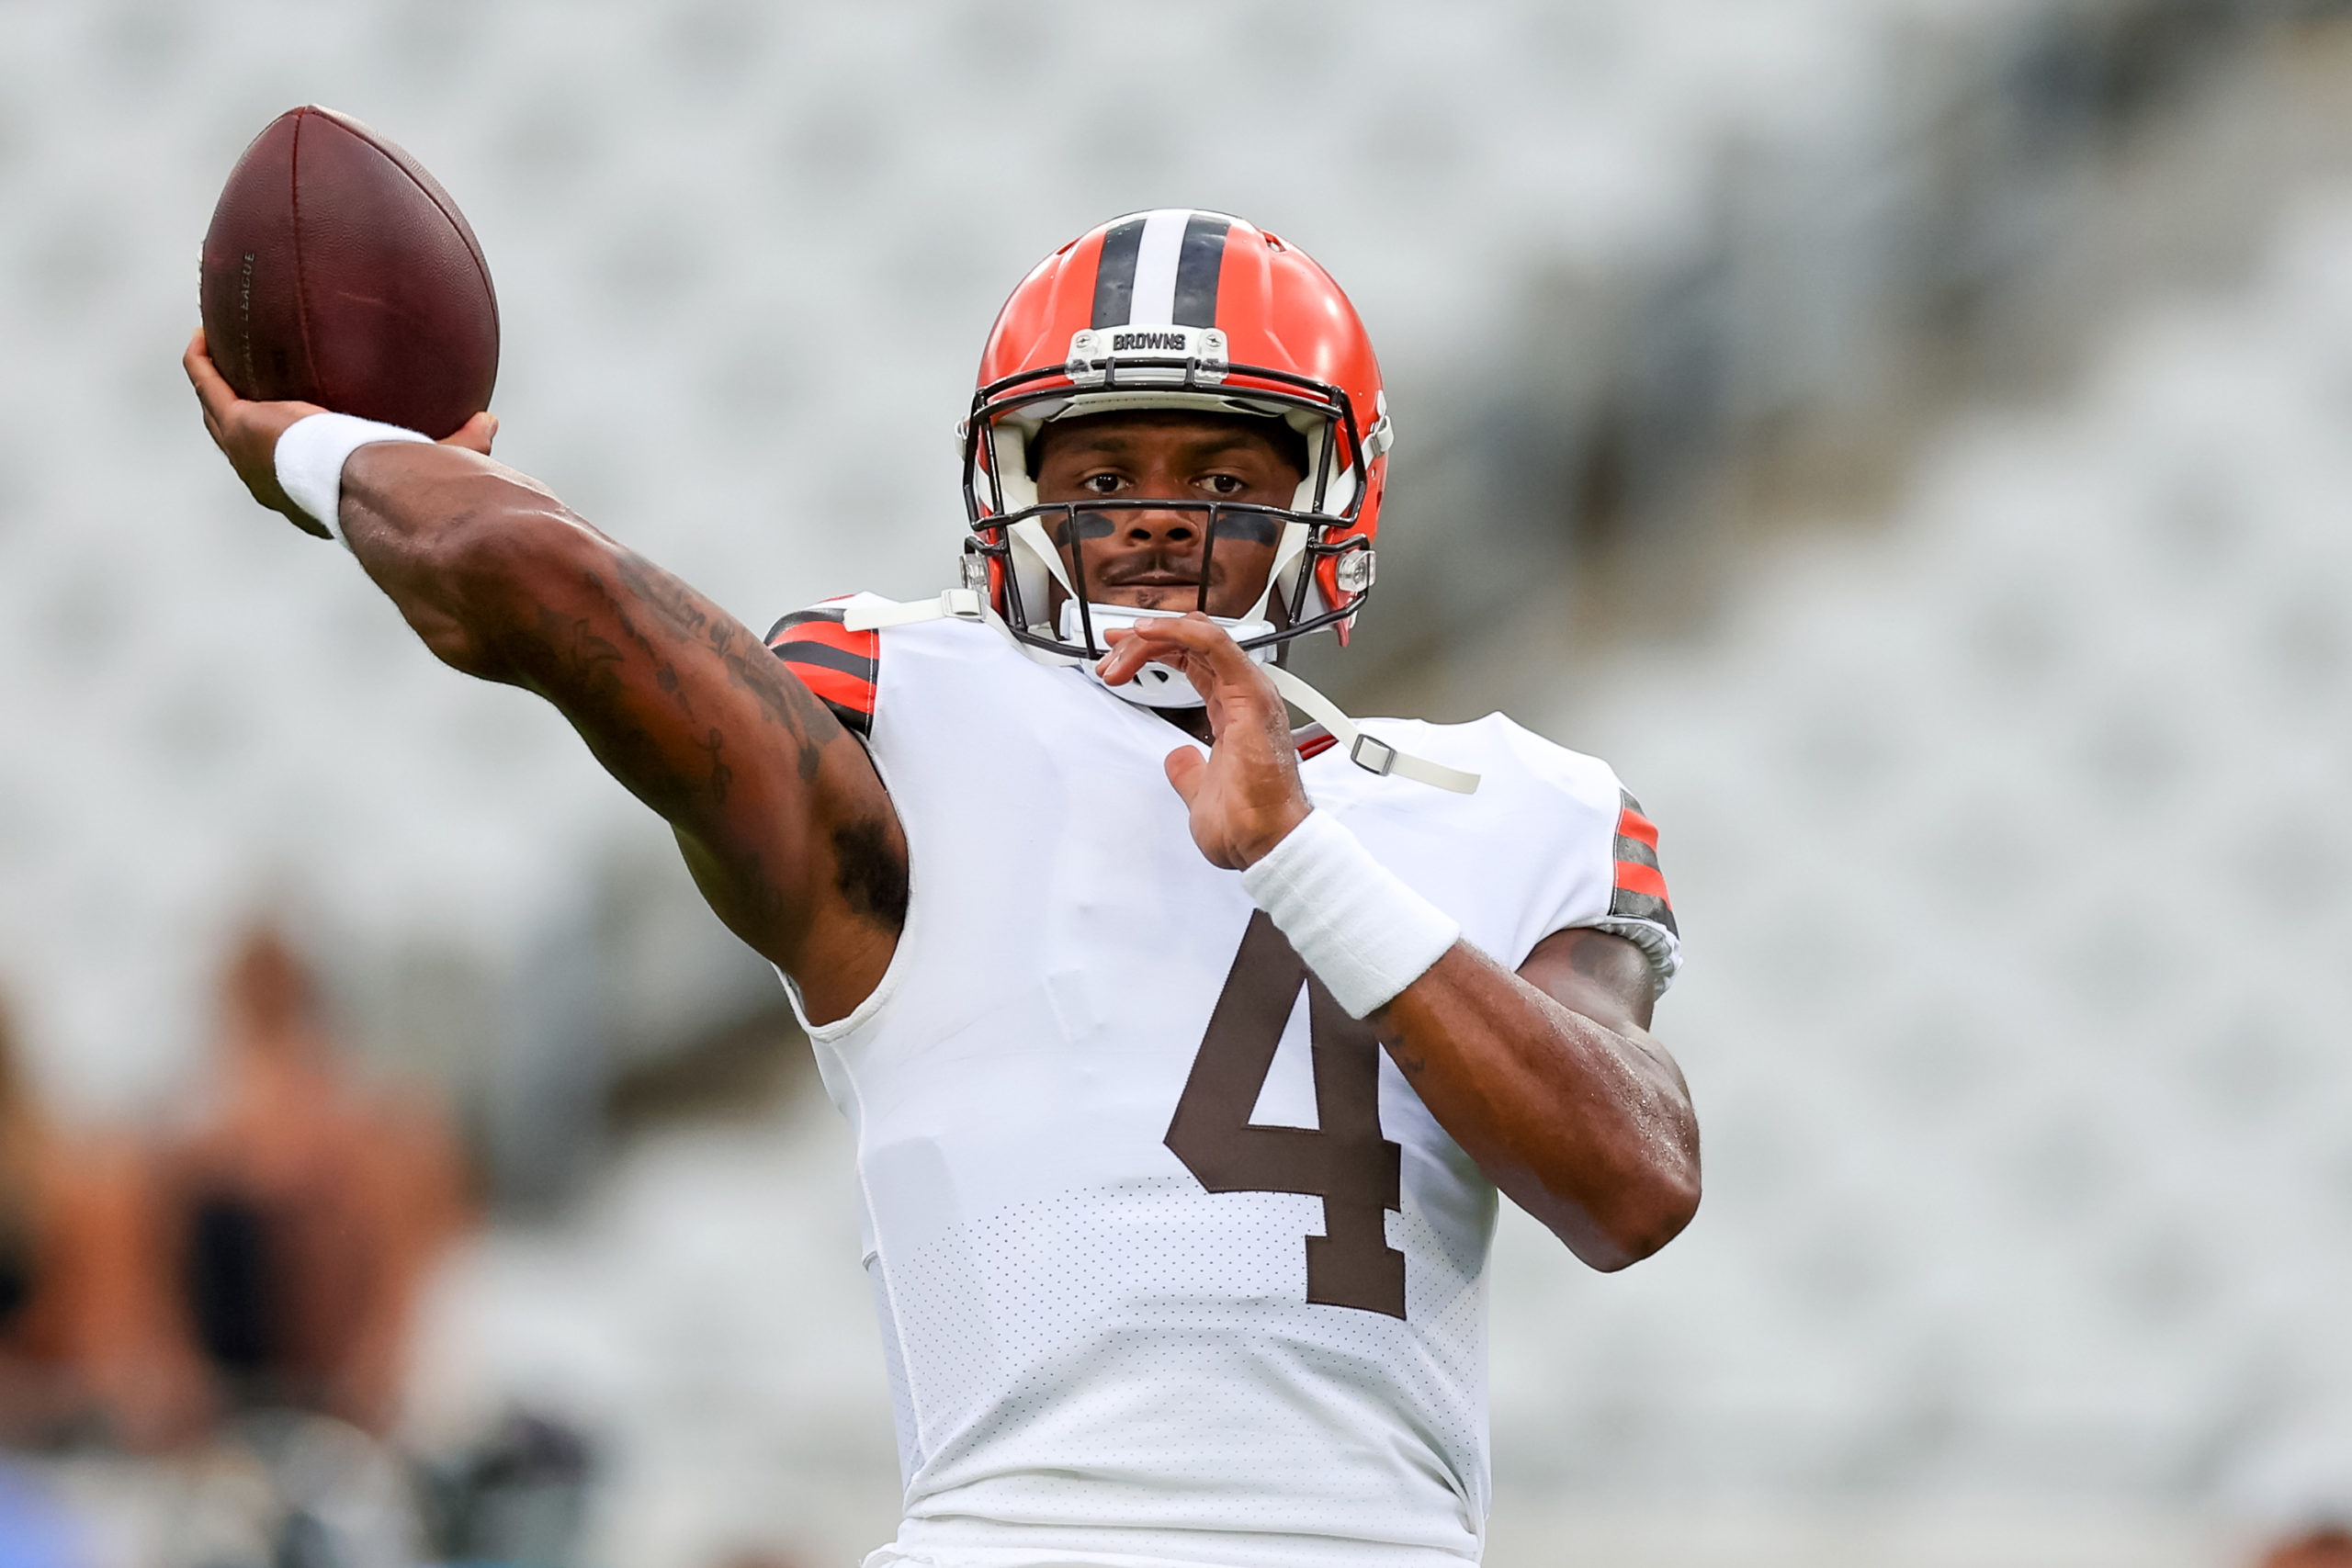 Deshaun Watson #4 of the Cleveland Browns warms up prior to a football game against the Jacksonvill...